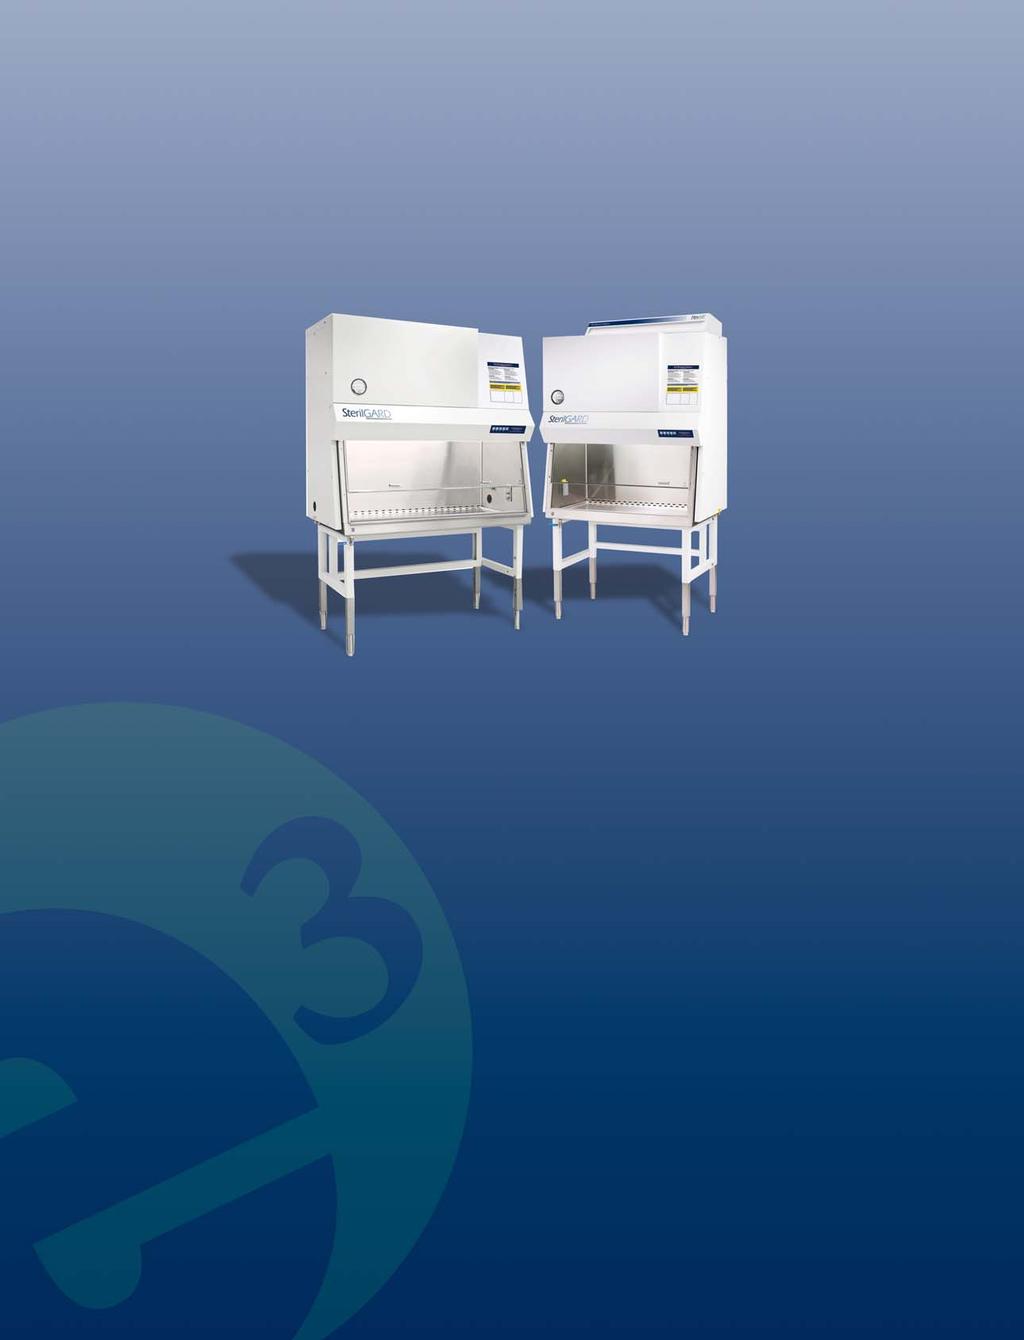 INTRODUCING THE BAKER COMPANY STERILGARD e3 BIOLOGICAL SAFETY CABINETS Make the world a better place.